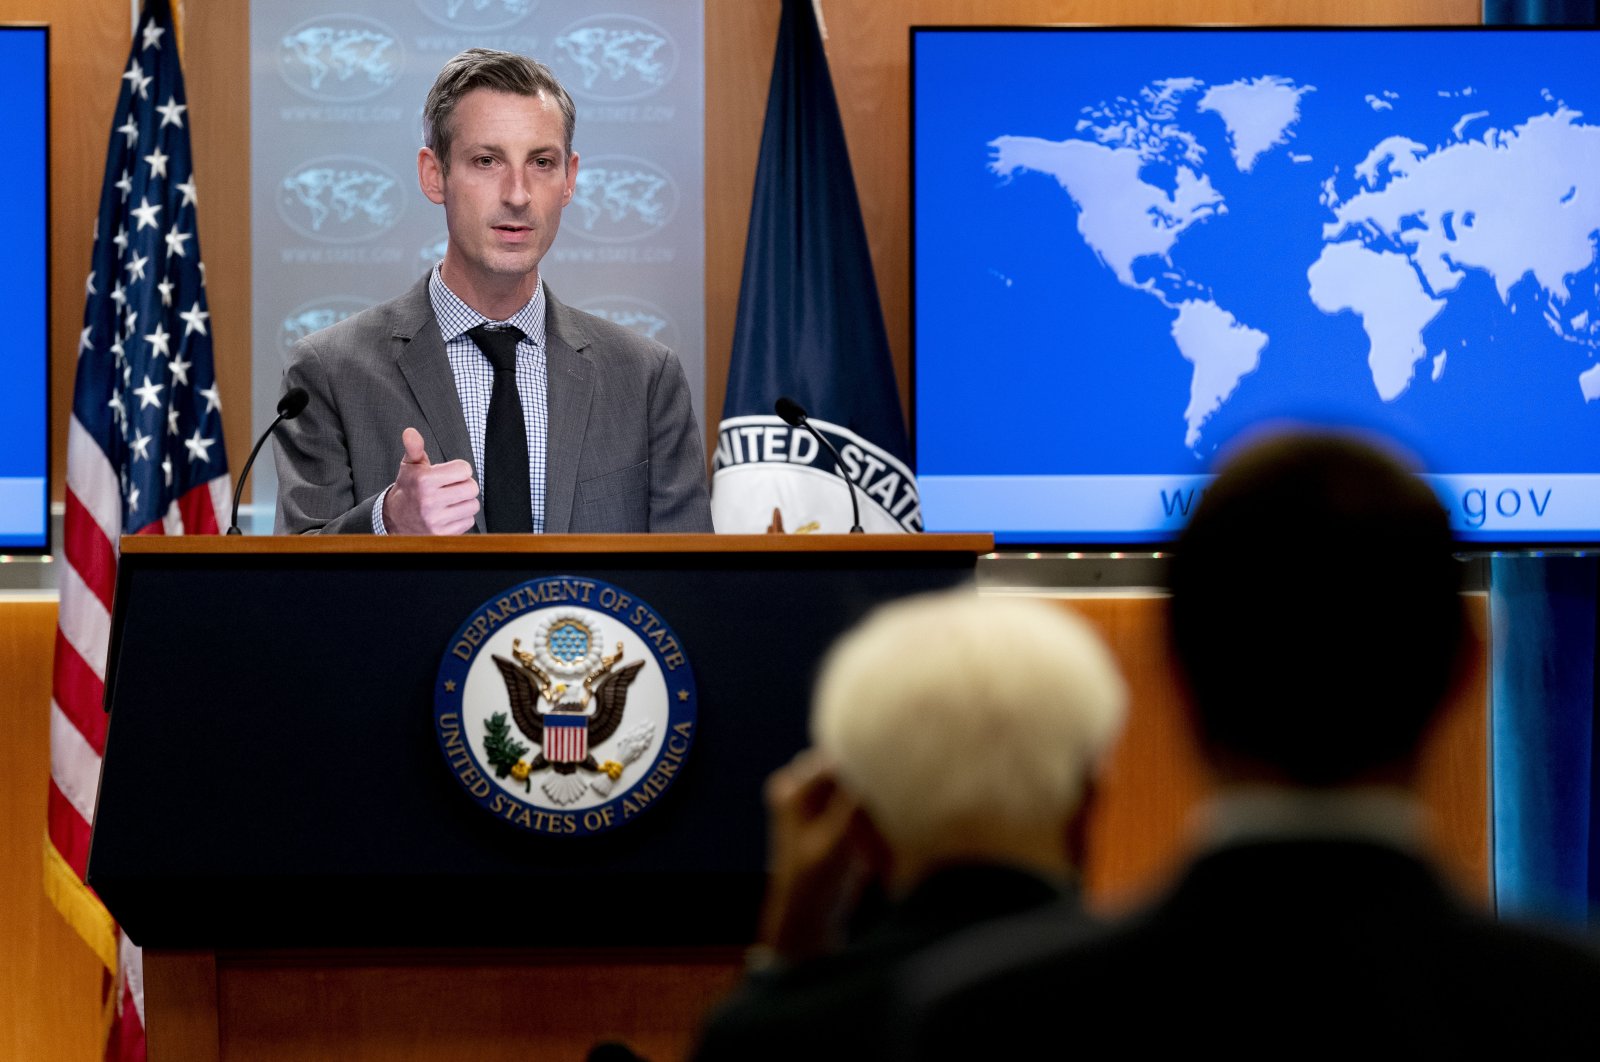 U.S. State Department spokesperson Ned Price takes a question from a reporter during a news conference at the State Department in Washington, D.C., U.S., Feb. 7, 2022. (AP Photo)